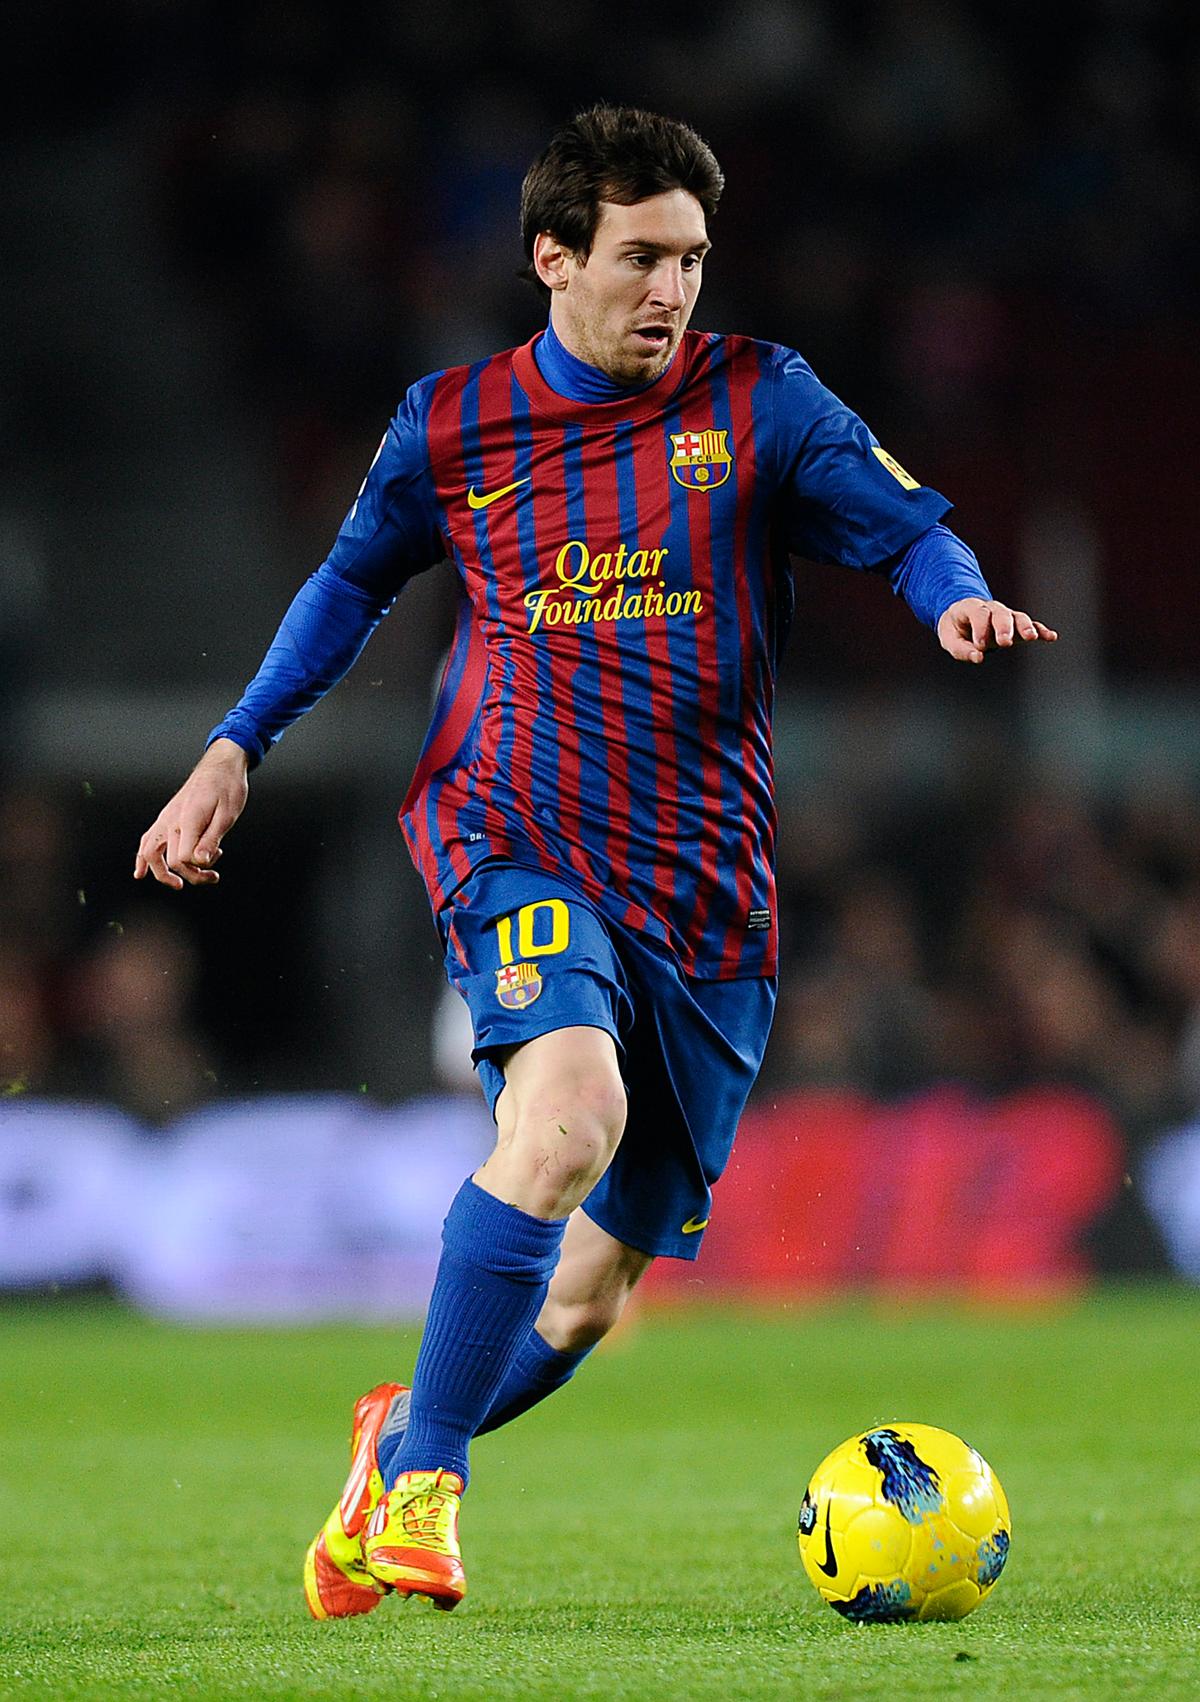 Lionel Messi of FC Barcelona runs with the ball during the La Liga match between FC Barcelona and Rayo Vallecano at Camp Nou on November 29, 2011 in Barcelona, Spain. Barcelona won 4-0. (Photo by David Ramos/Getty Images)